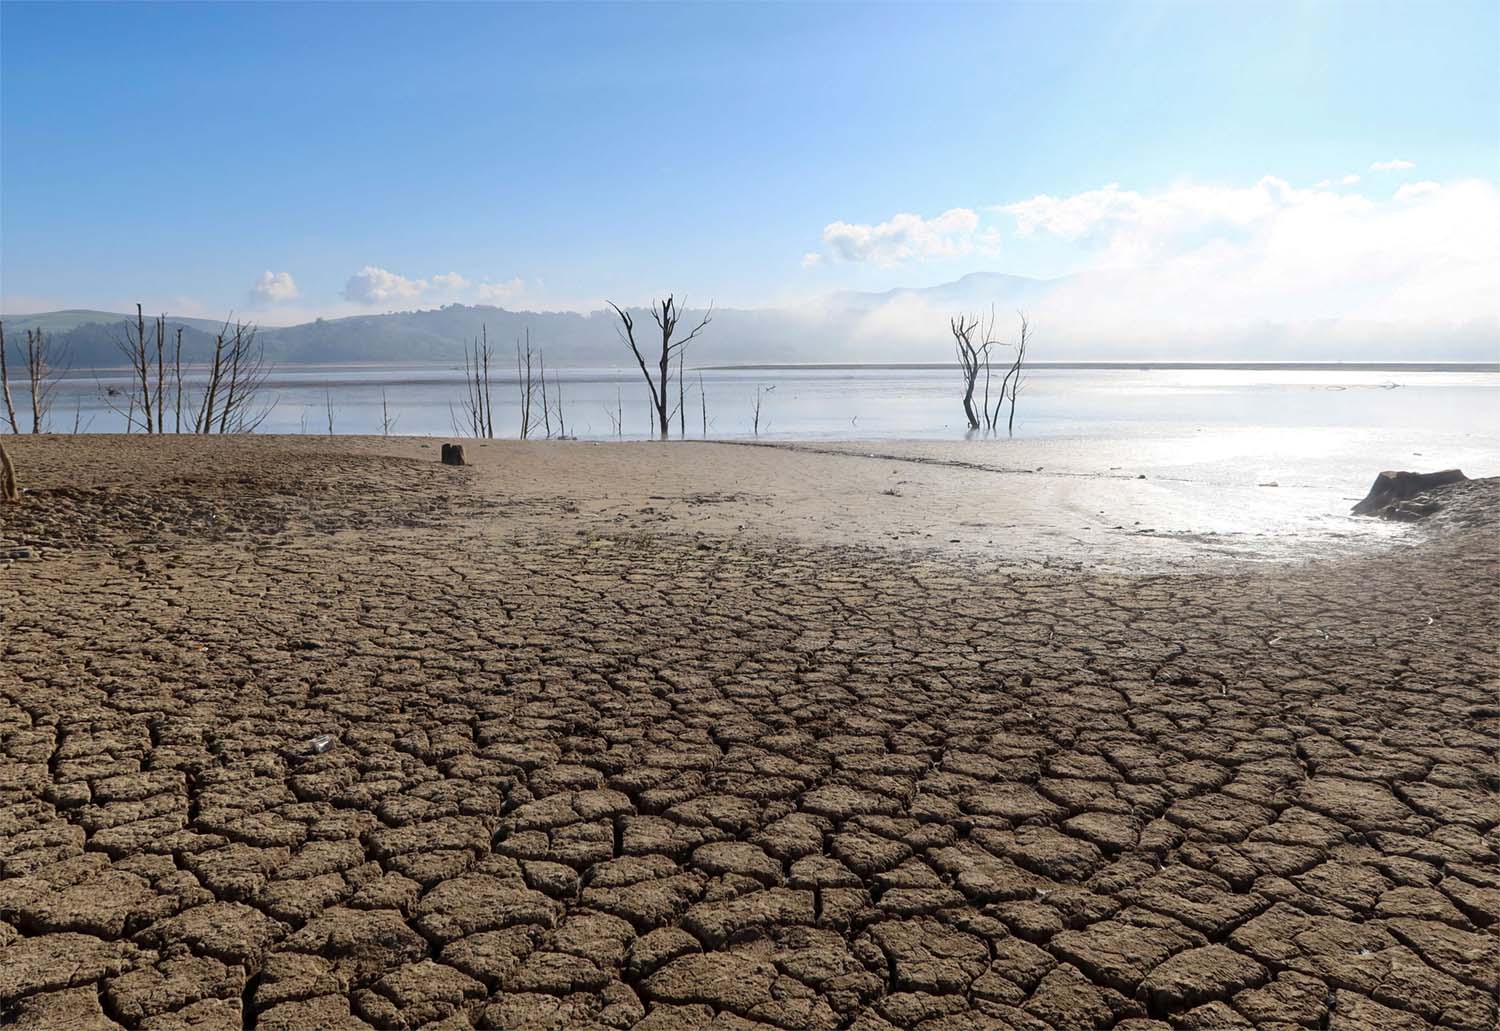 Tunisia is threatened by water scarcity